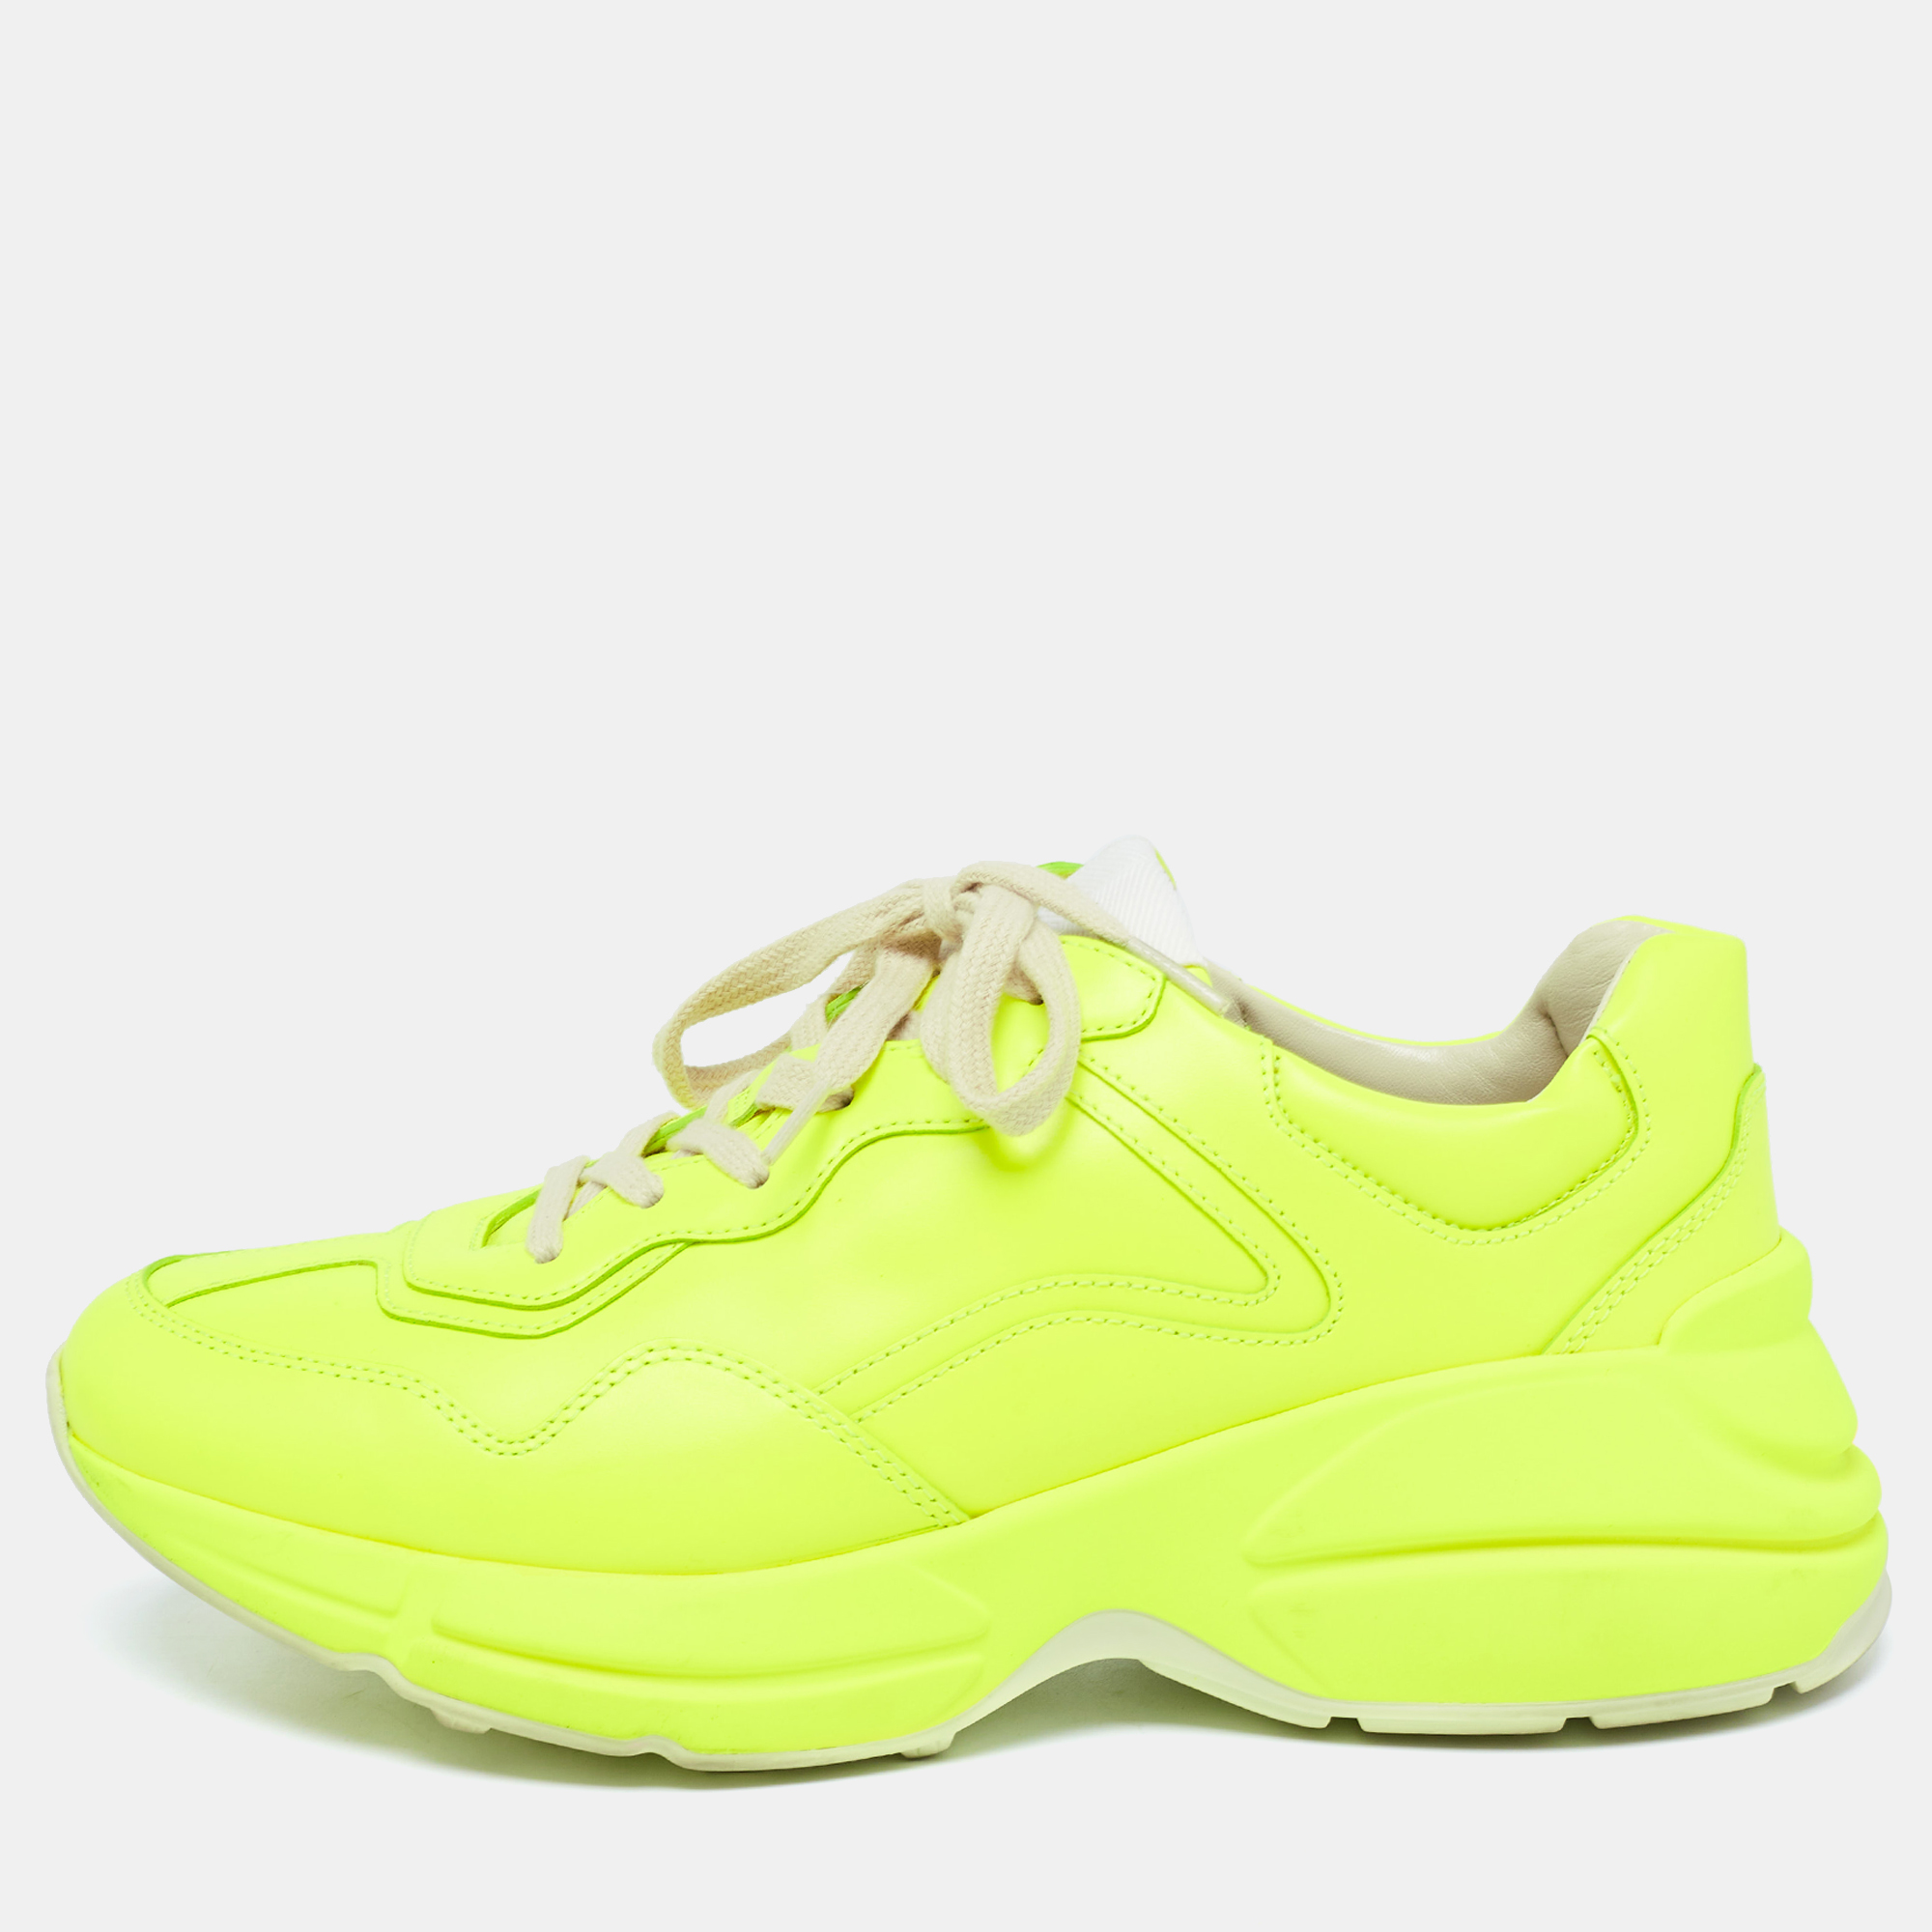 Gucci neon yellow leather rhyton sneakers size 39